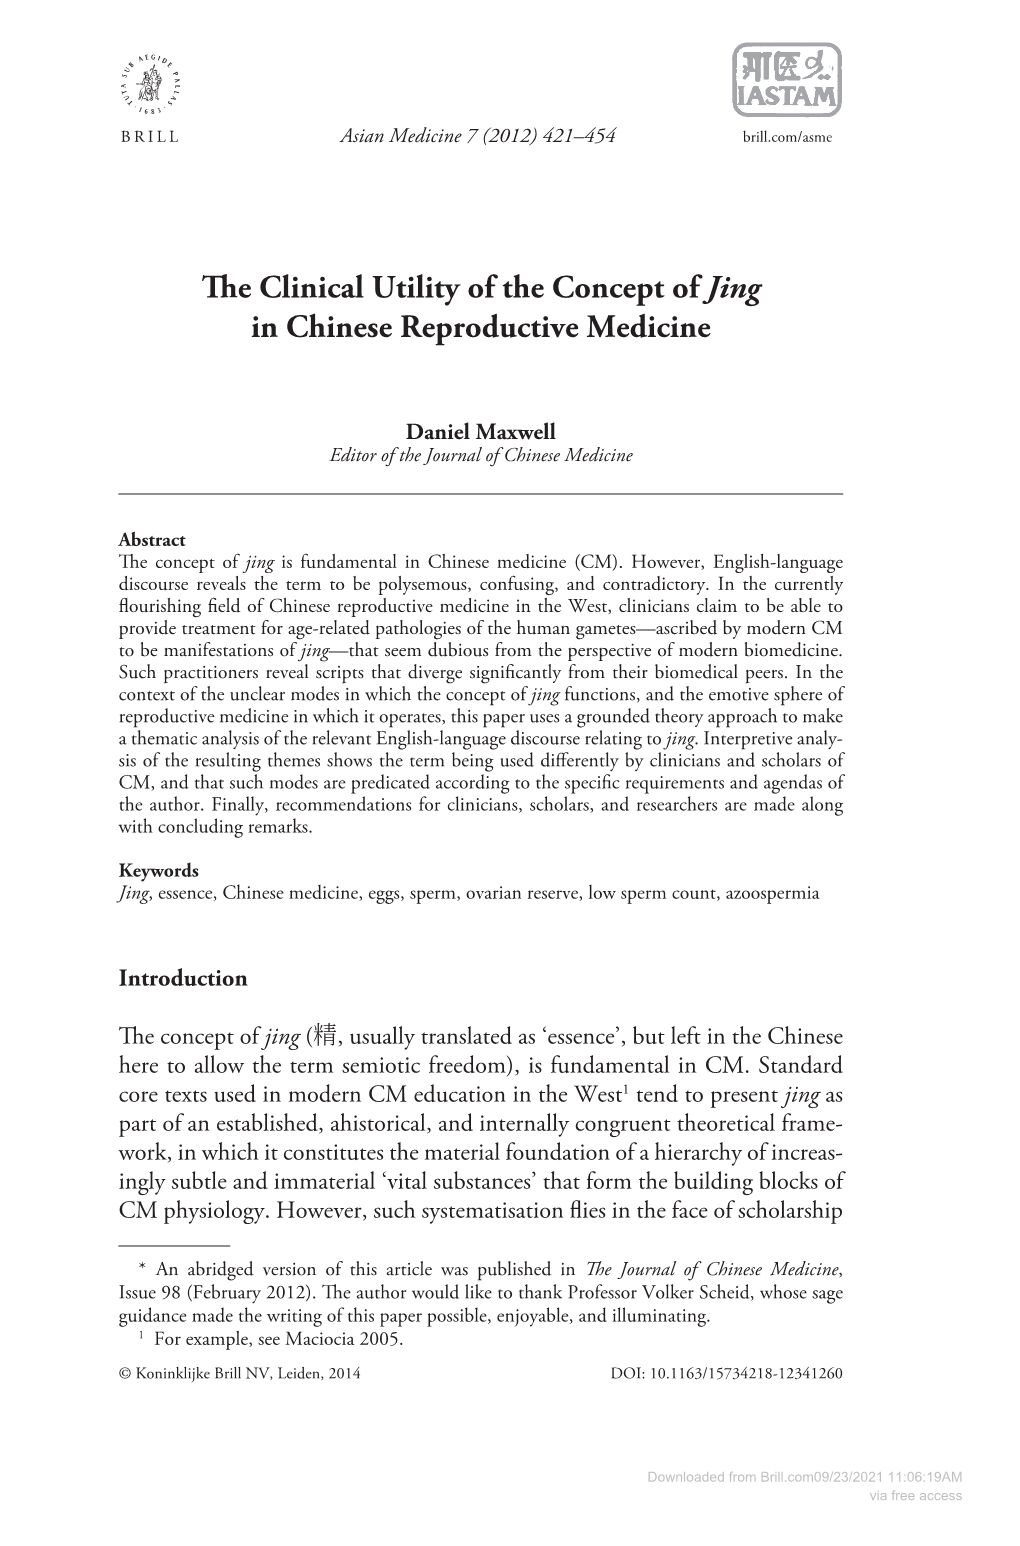 The Clinical Utility of the Concept of Jing in Chinese Reproductive Medicine